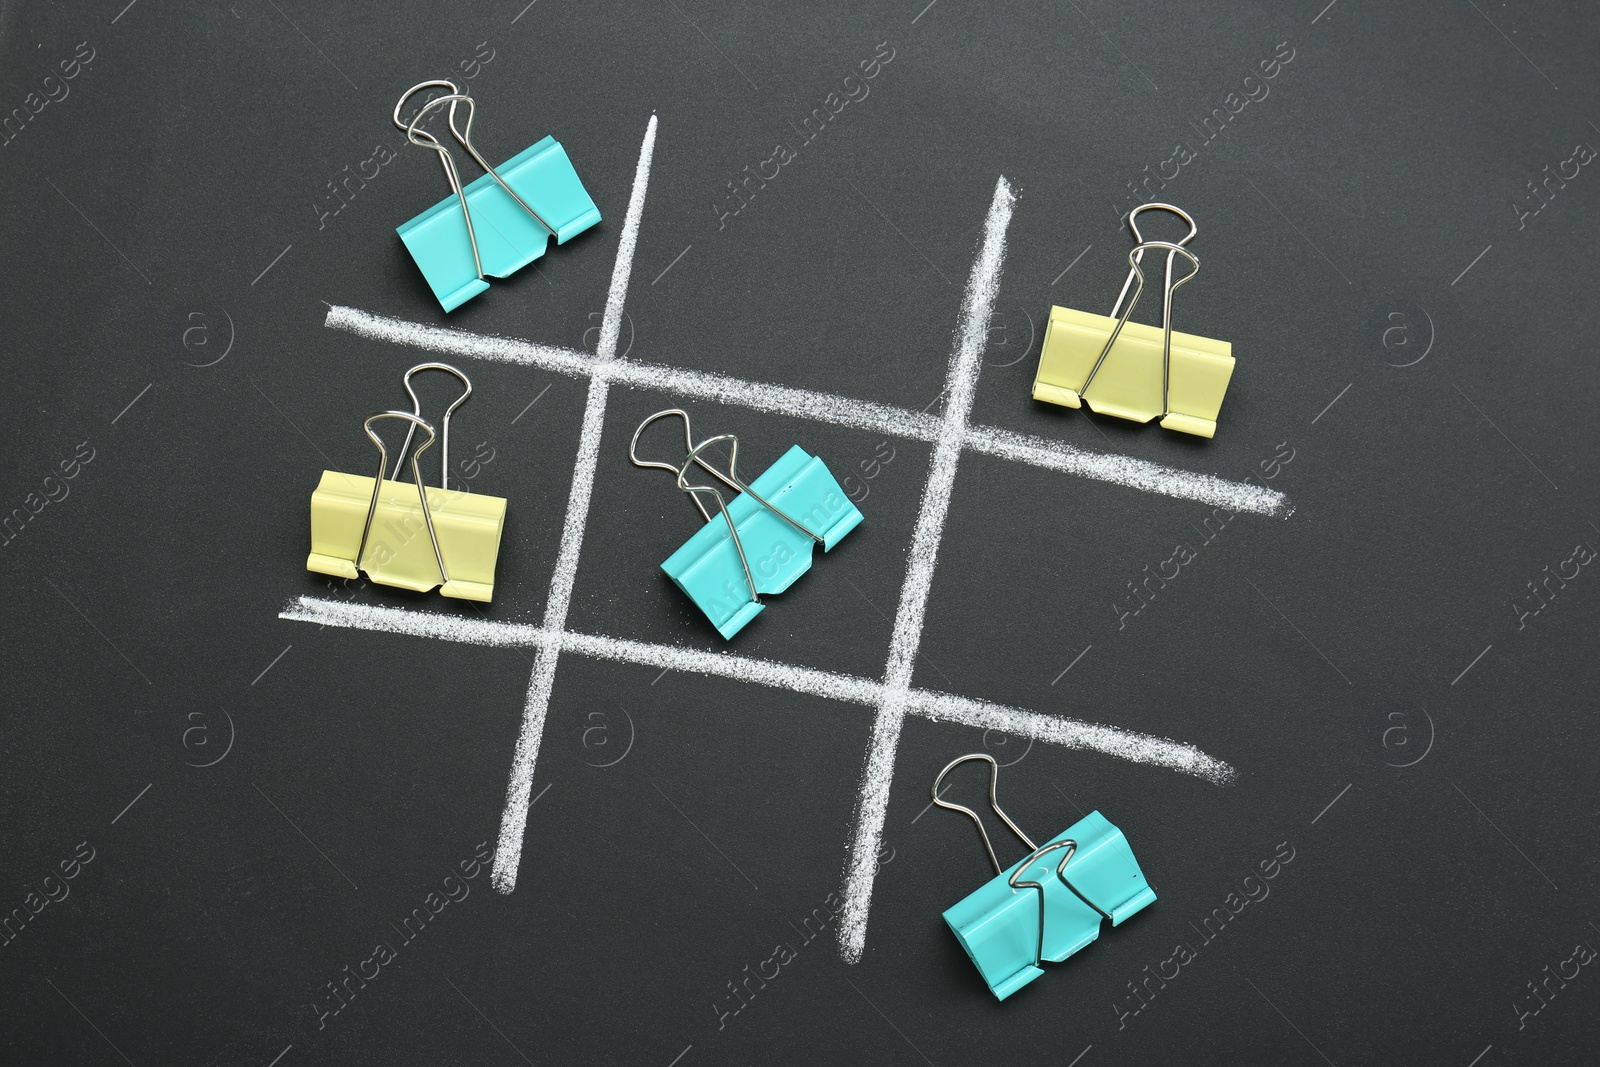 Photo of Tic tac toe game made with paper clips on chalkboard, top view